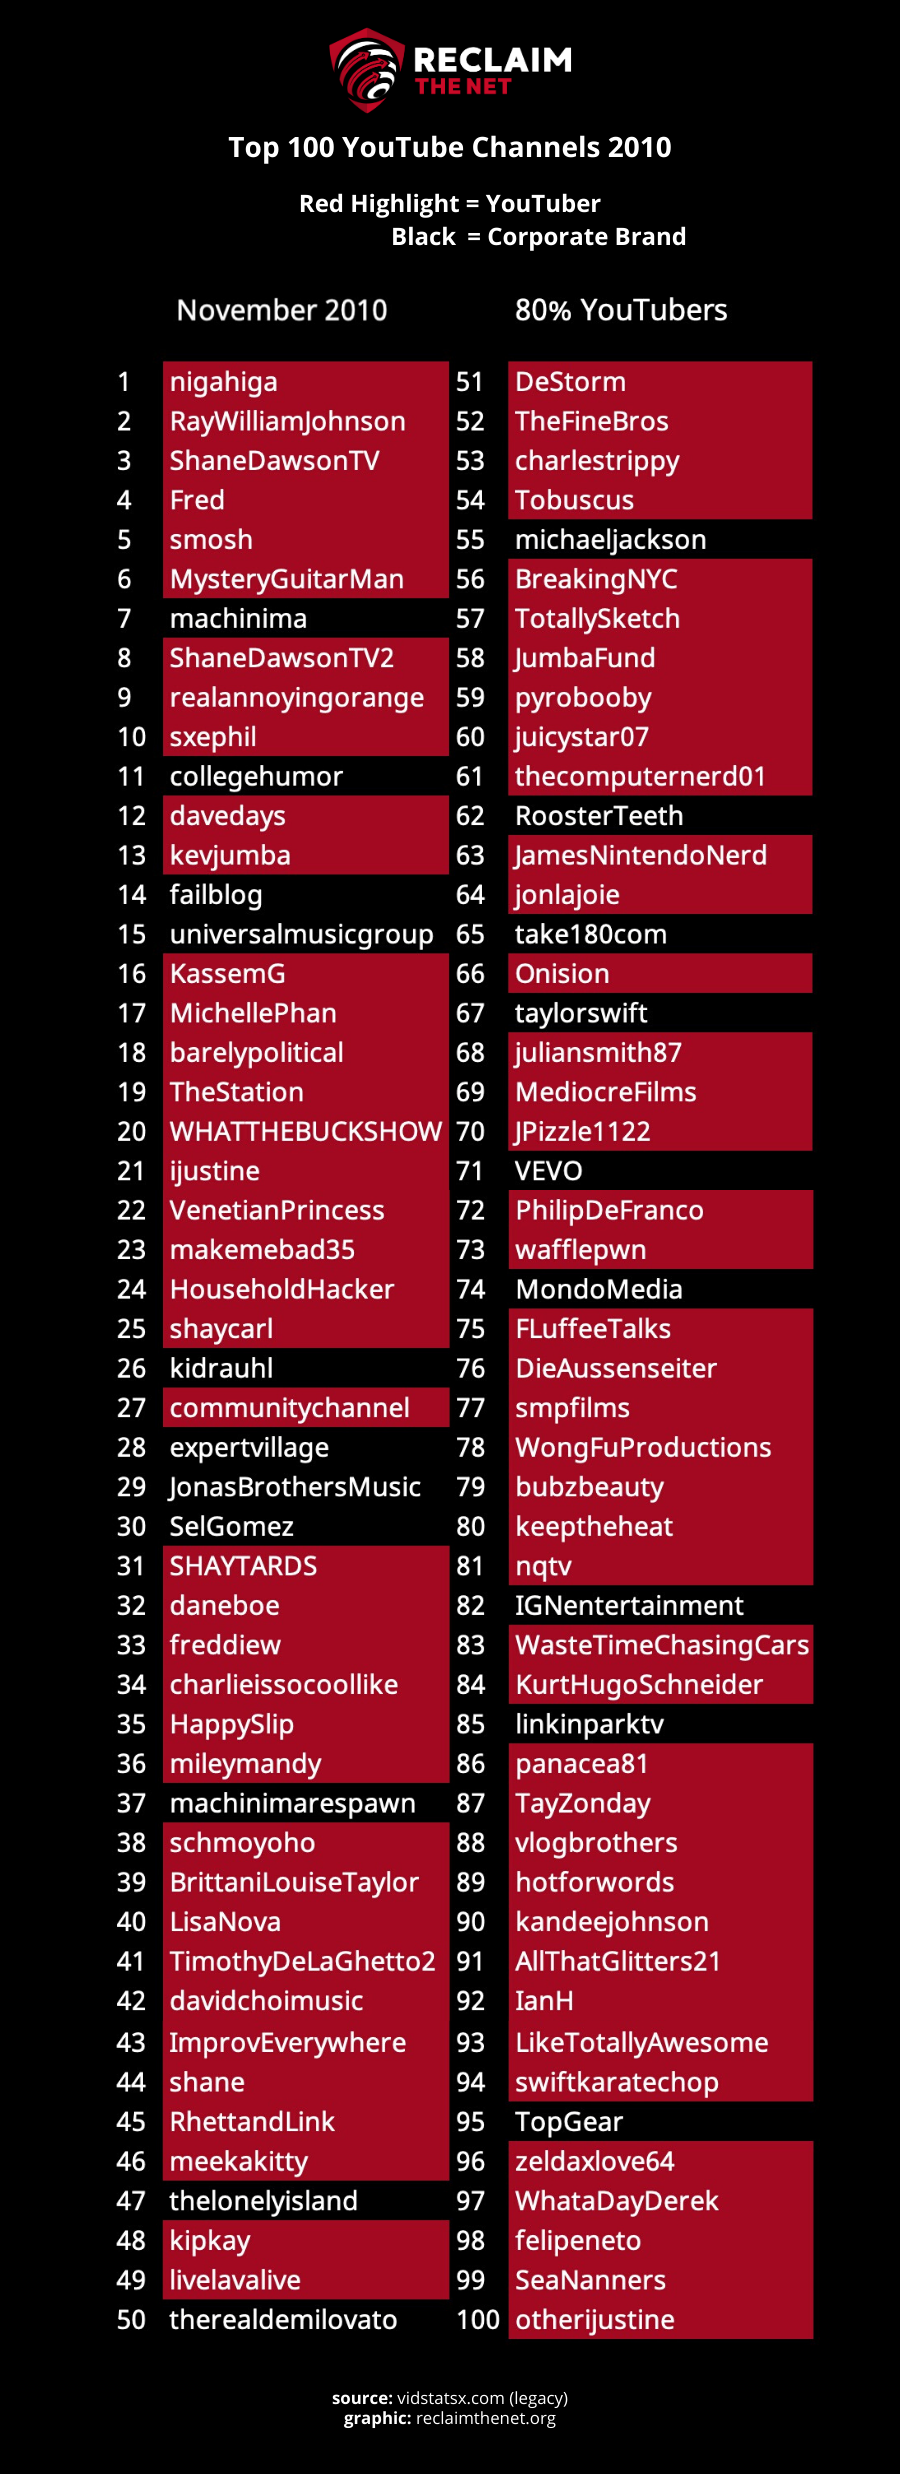 The top 100 most subscribed YouTube channels in November 2010 (Source: Wayback Machine - VidStatsX)